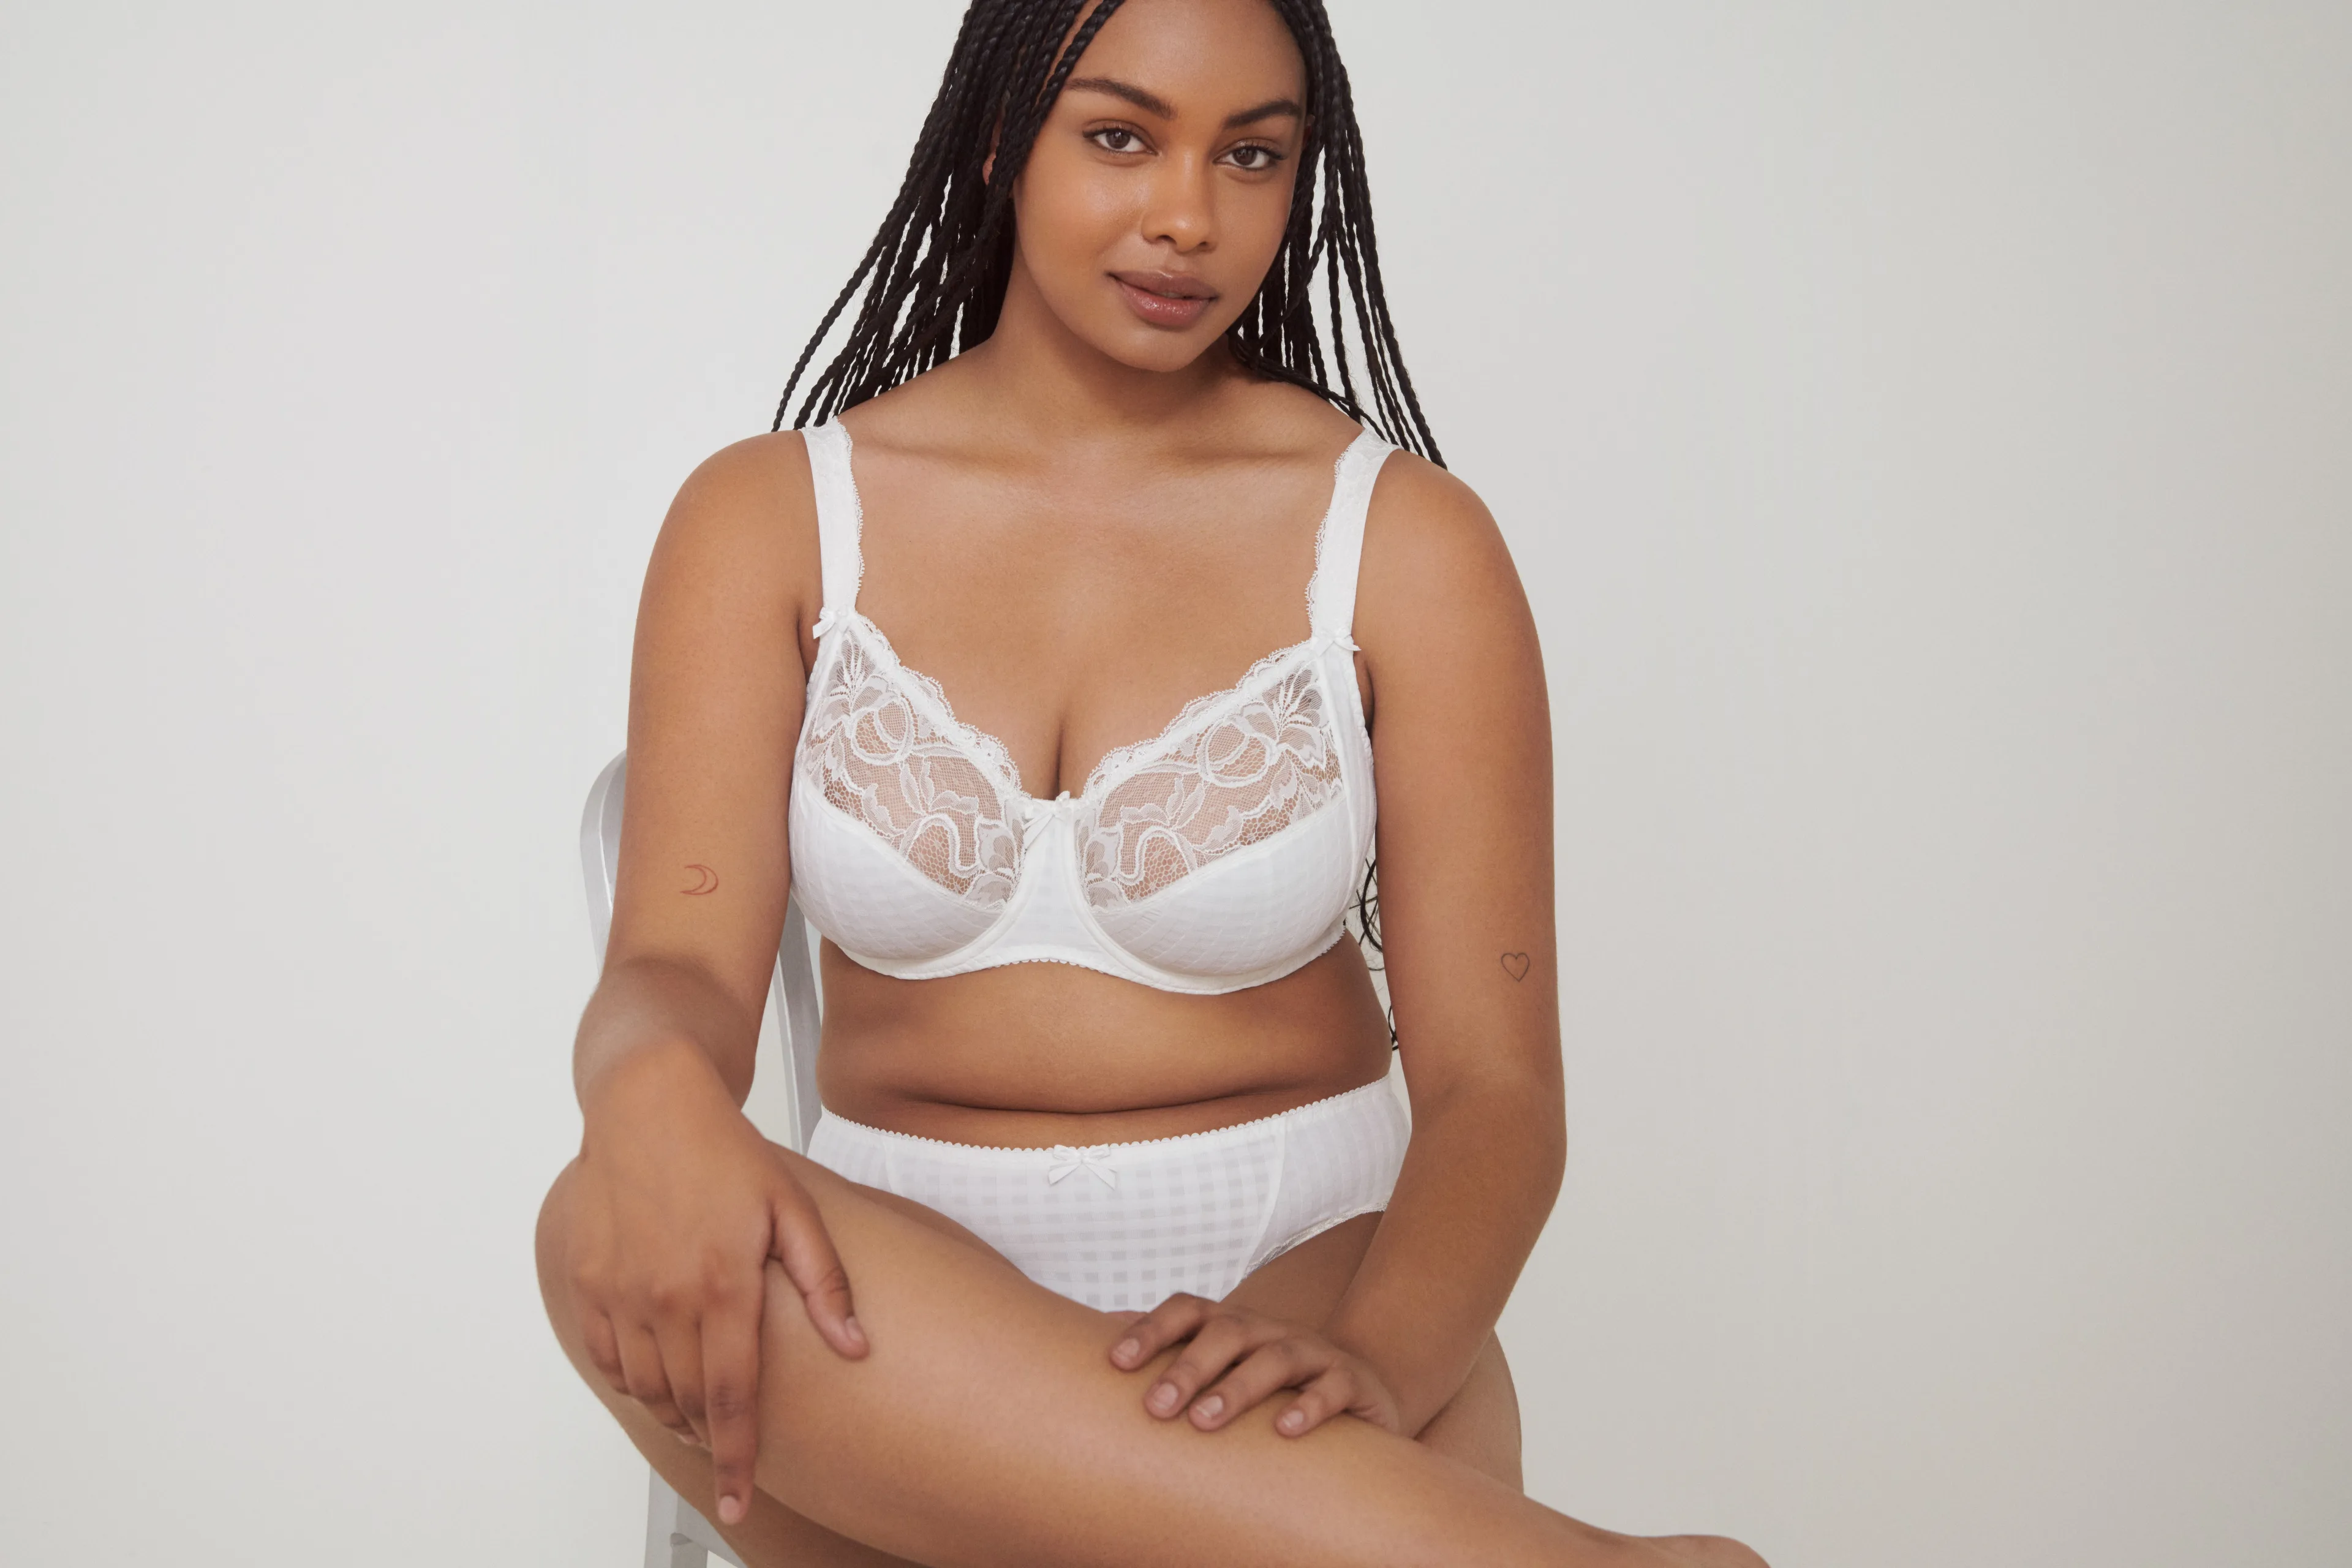 What are the different types of bridal lingerie?